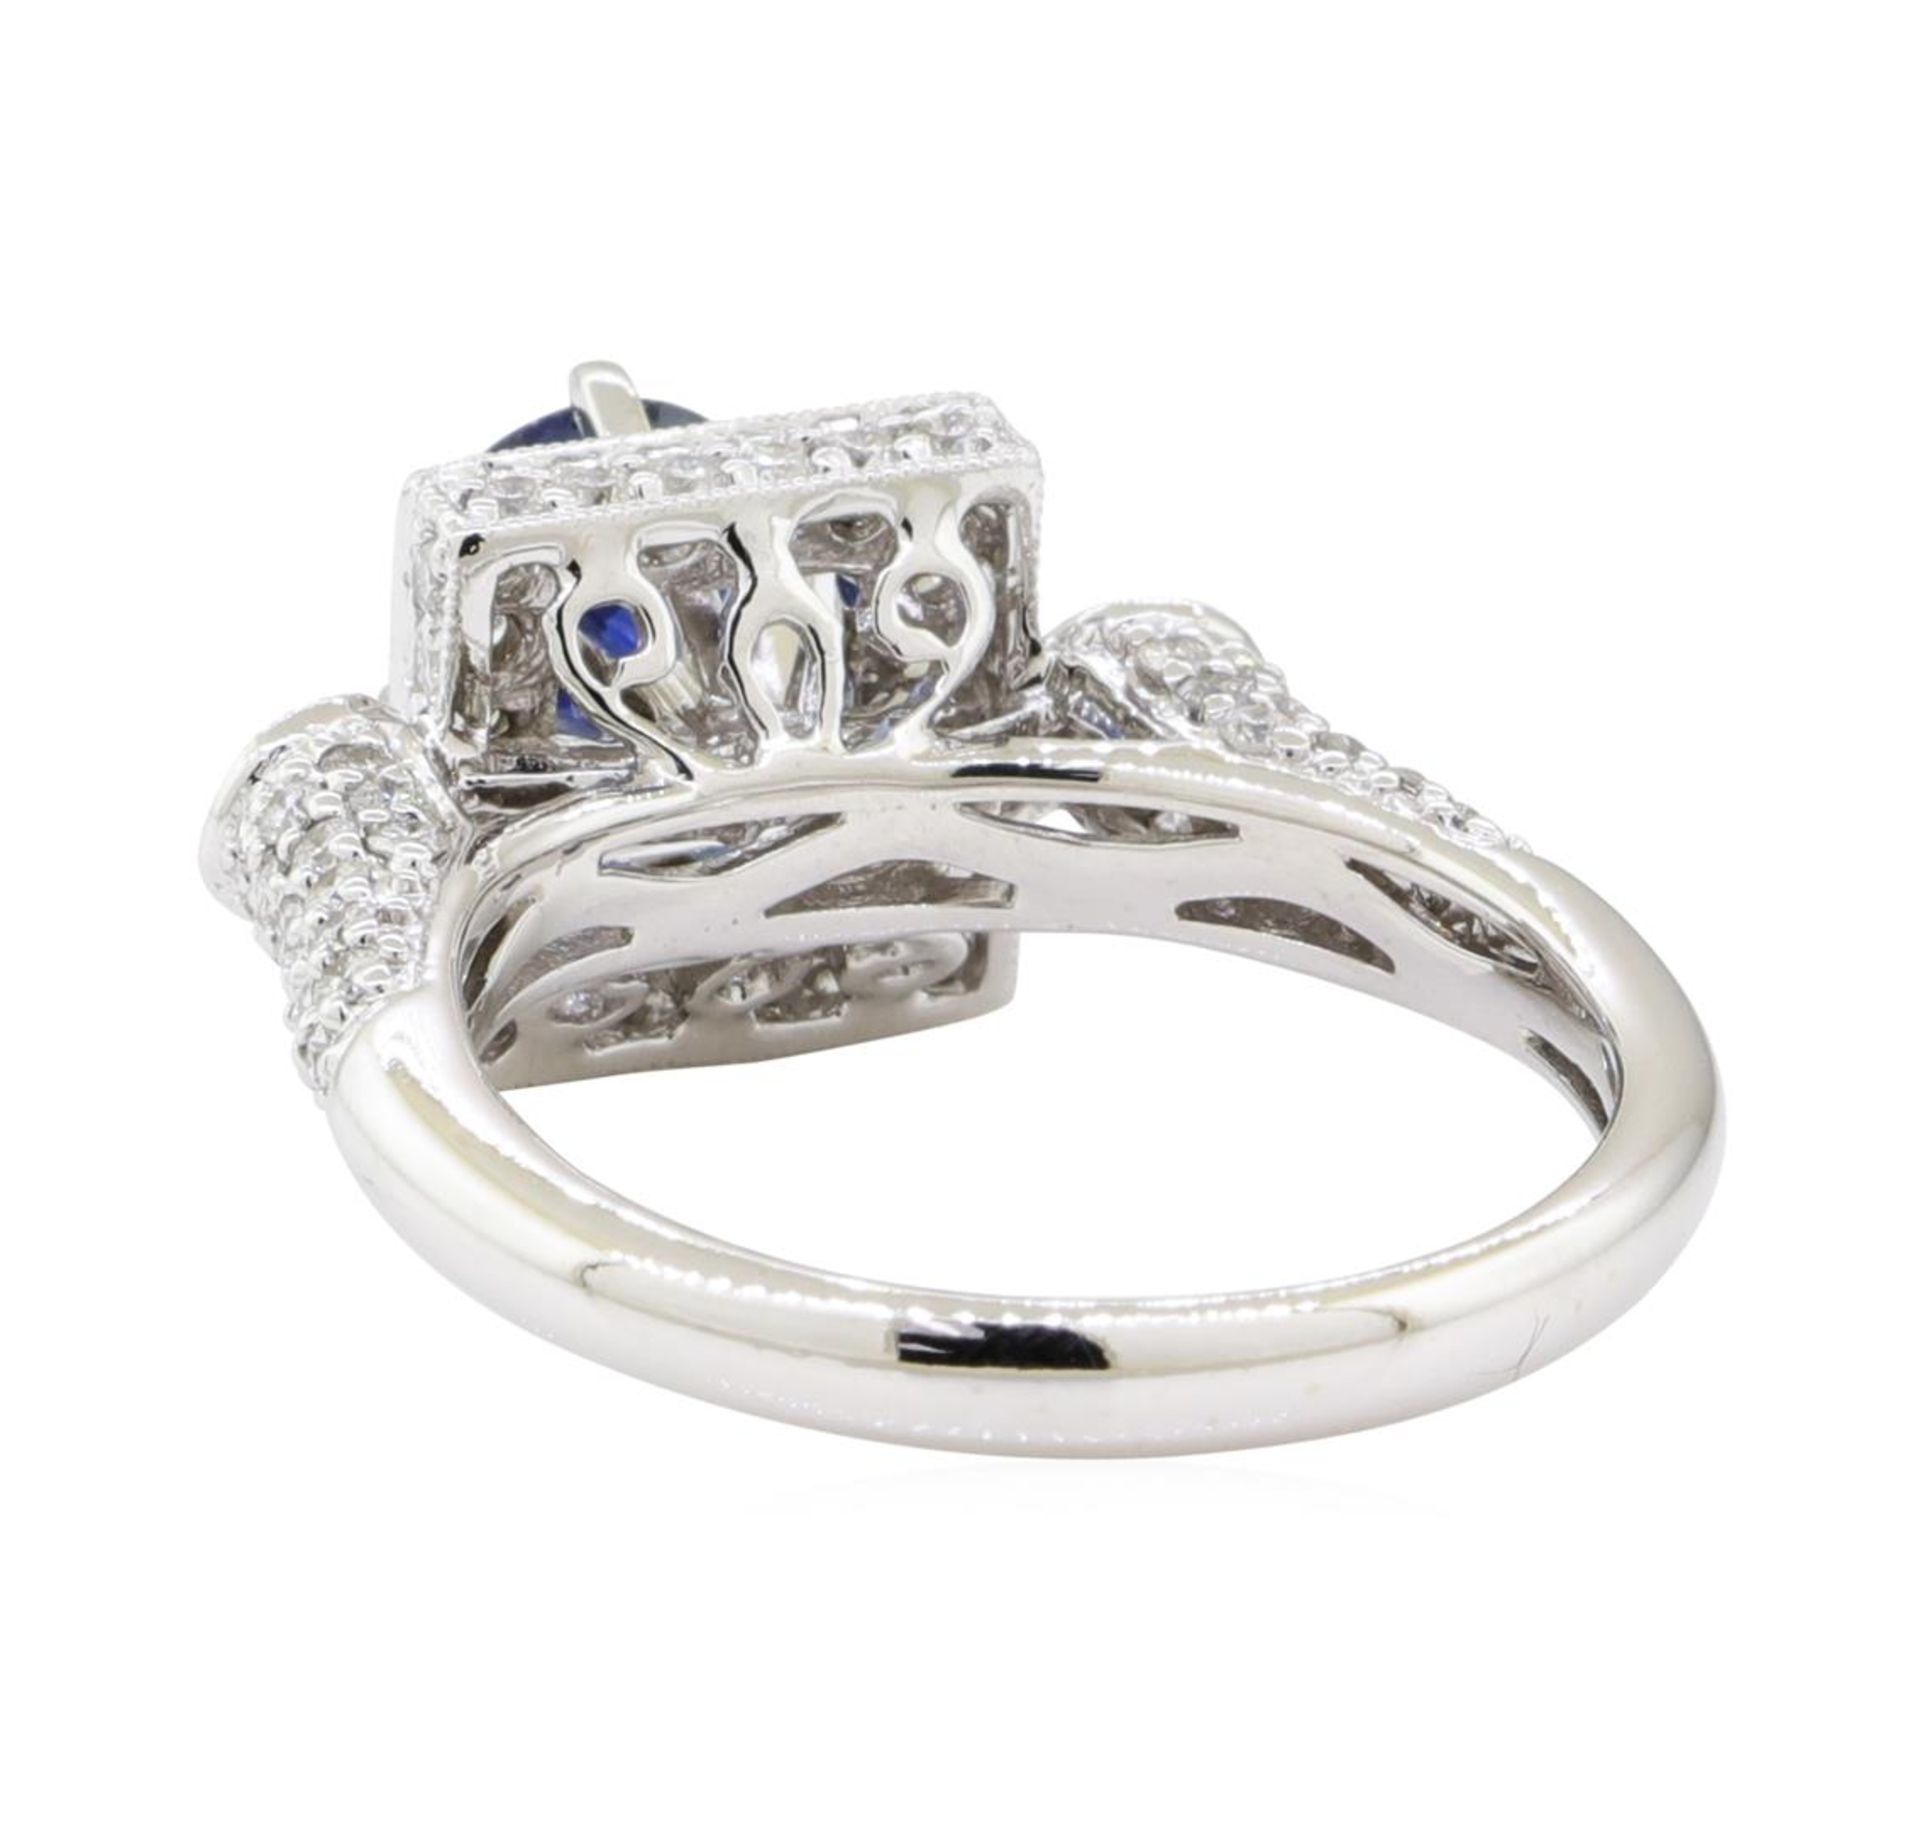 2.09 ctw Sapphire and Diamond Ring - 18KT White Gold - Image 3 of 5